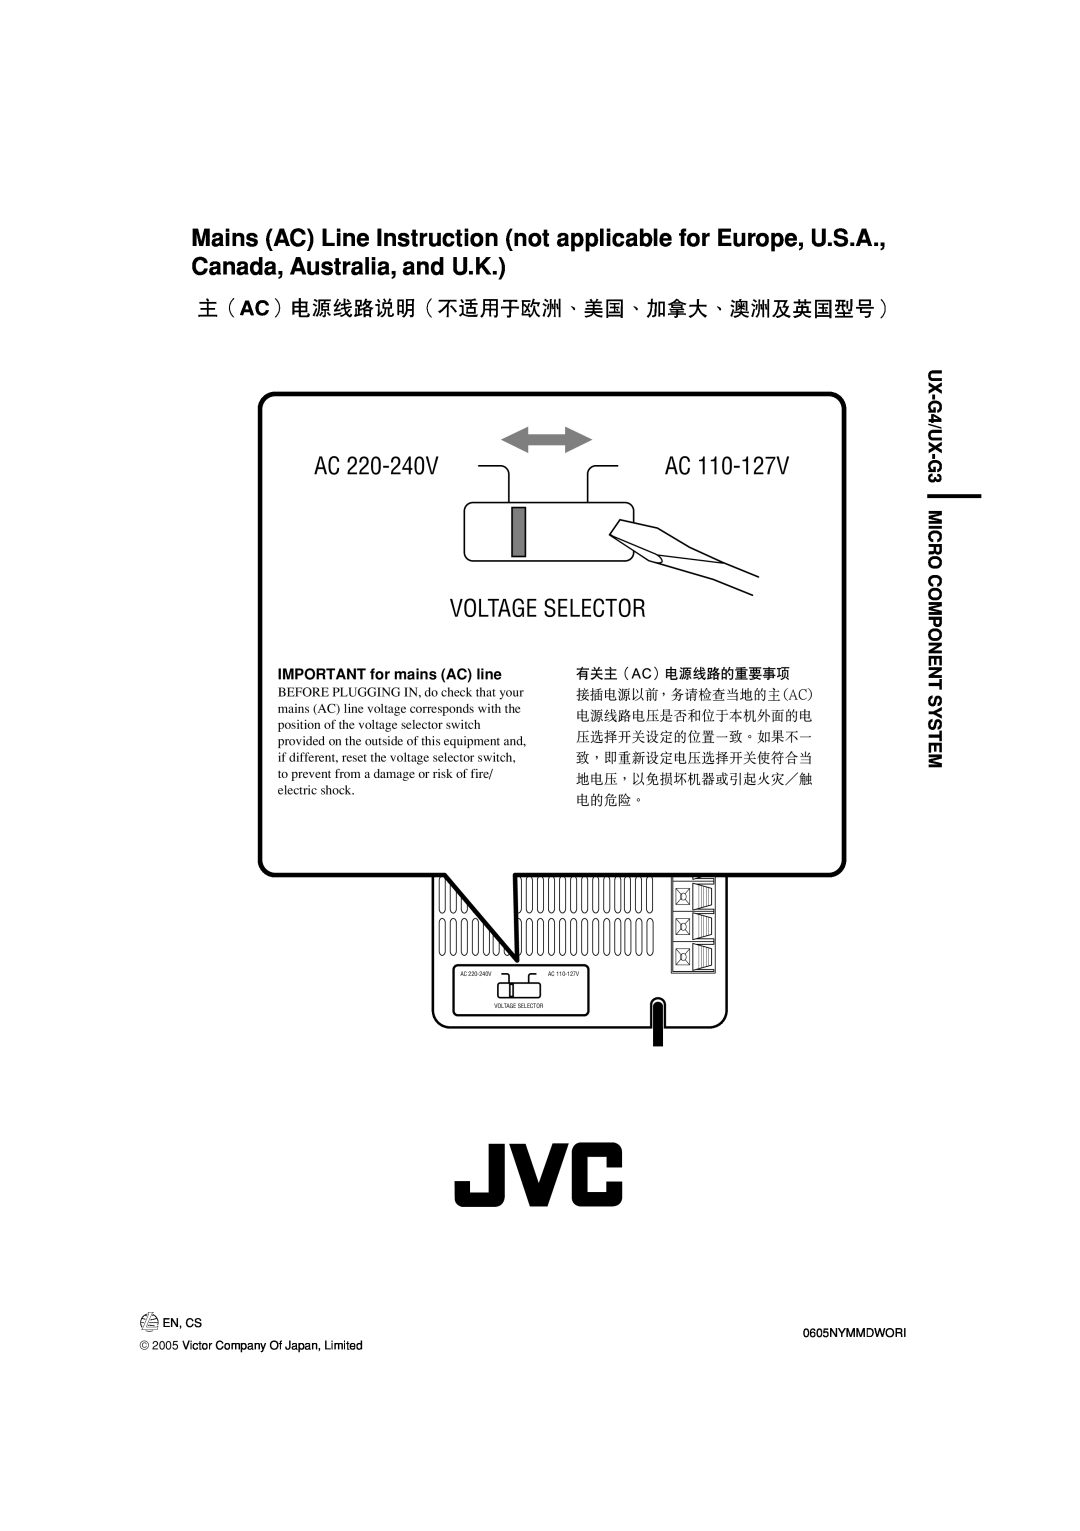 JVC LVT1364-006B Voltage Selector, UX-G4/UX-G3MICRO COMPONENT SYSTEM, IMPORTANT for mains AC line, EN, CS 0605NYMMDWORI 